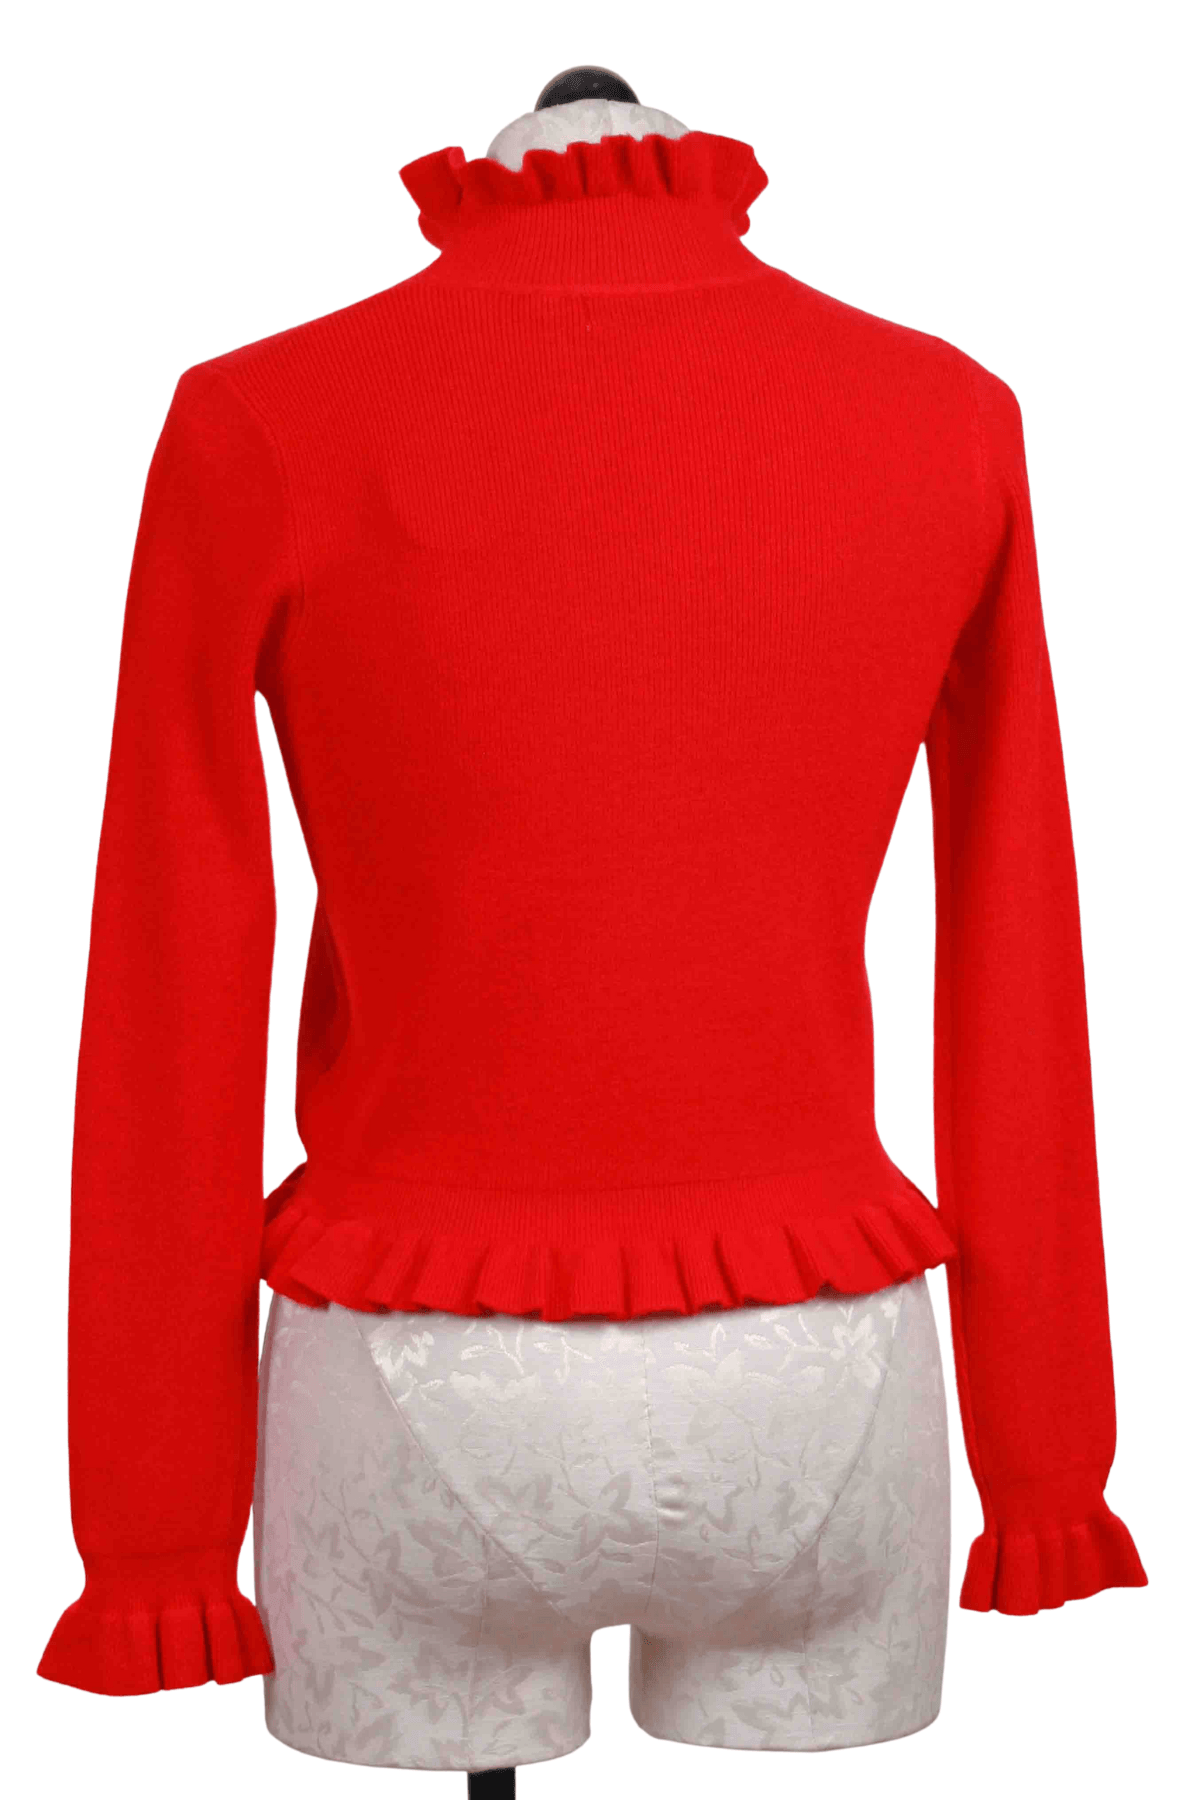 back view of red Lettuce Stitch Sweater by Patrizia Luca